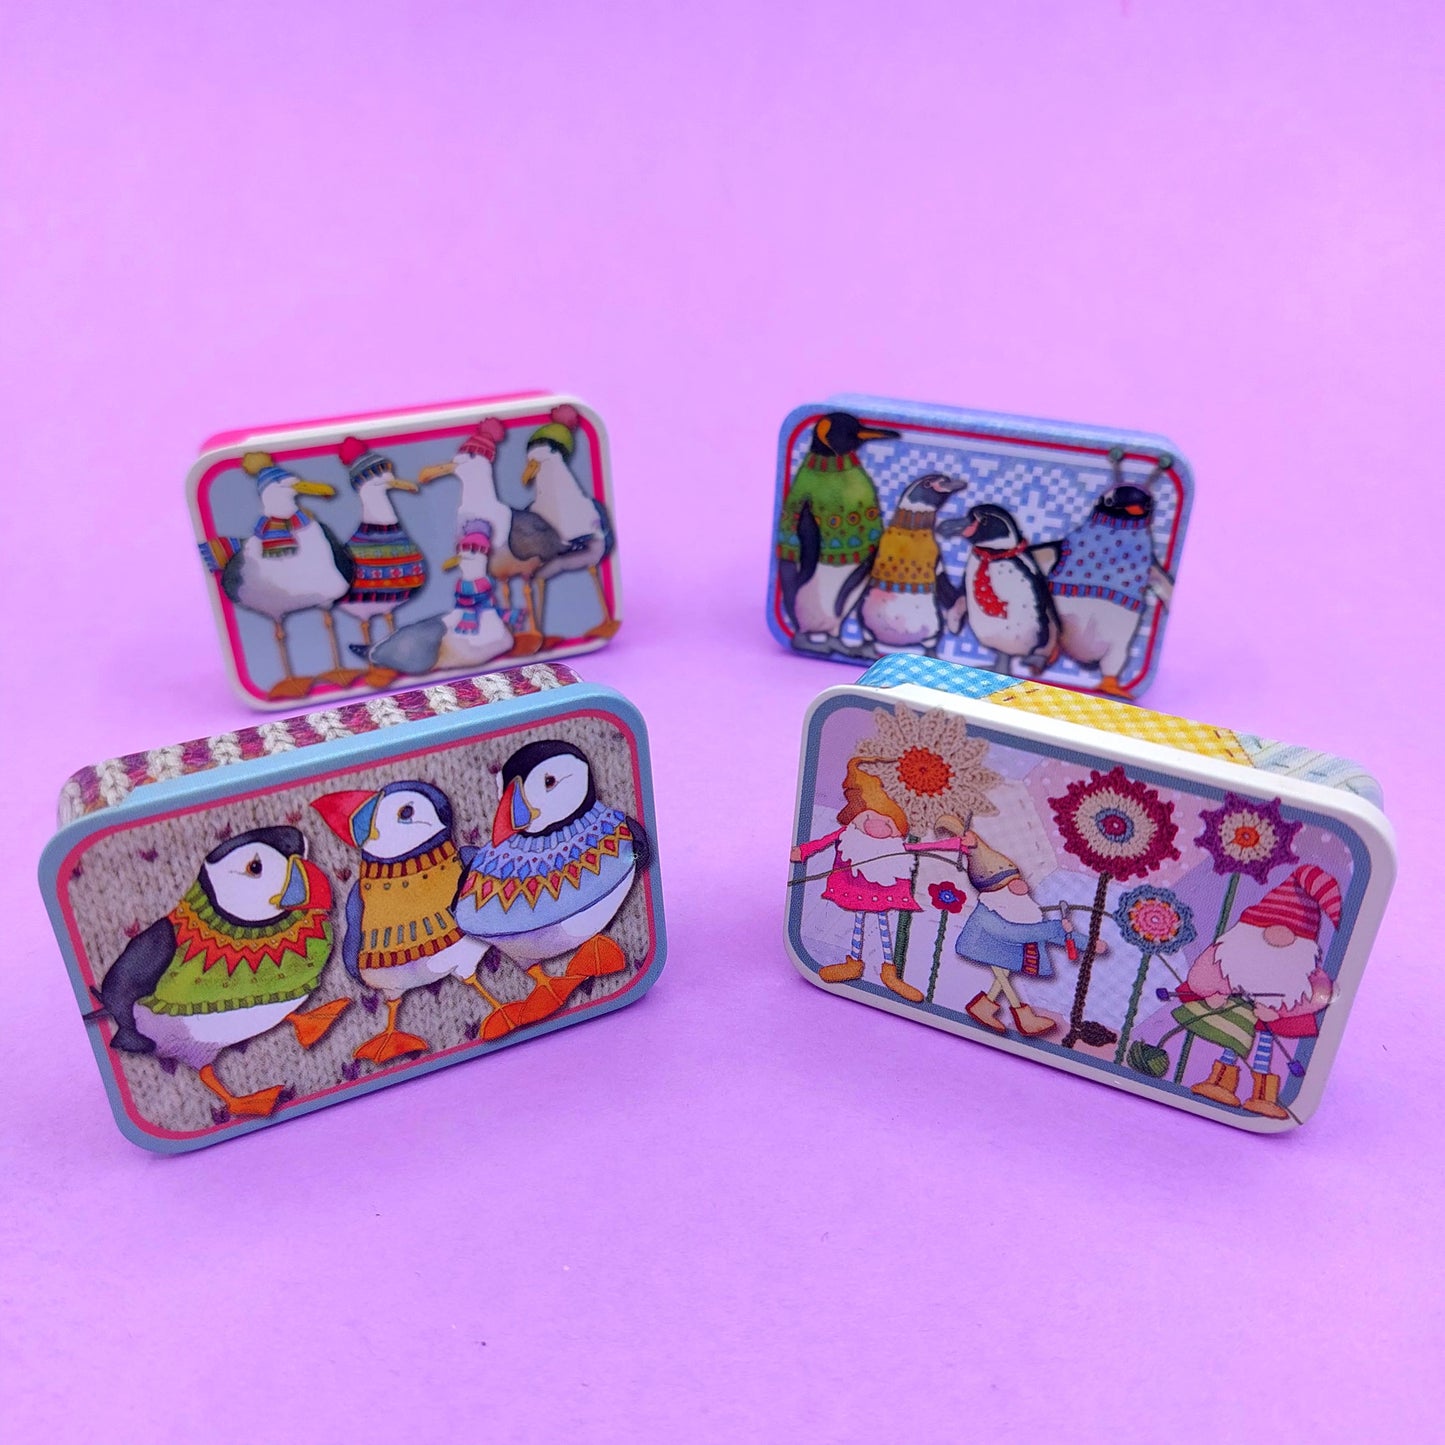 Cute Pocket Tins - choose from 4 designs